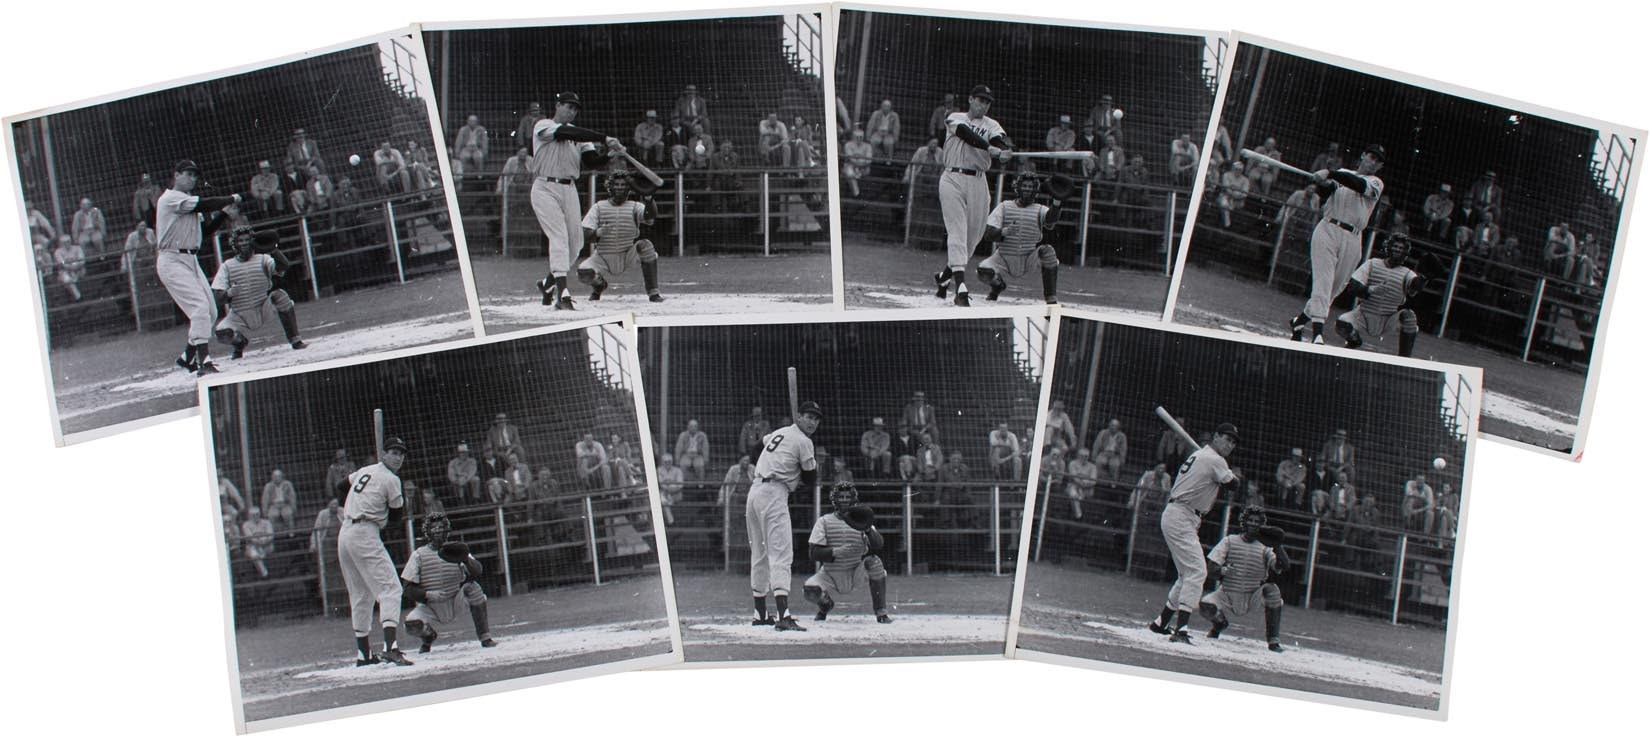 - 1943 Ted Williams WWII "Stop Motion" Photo Series (7)